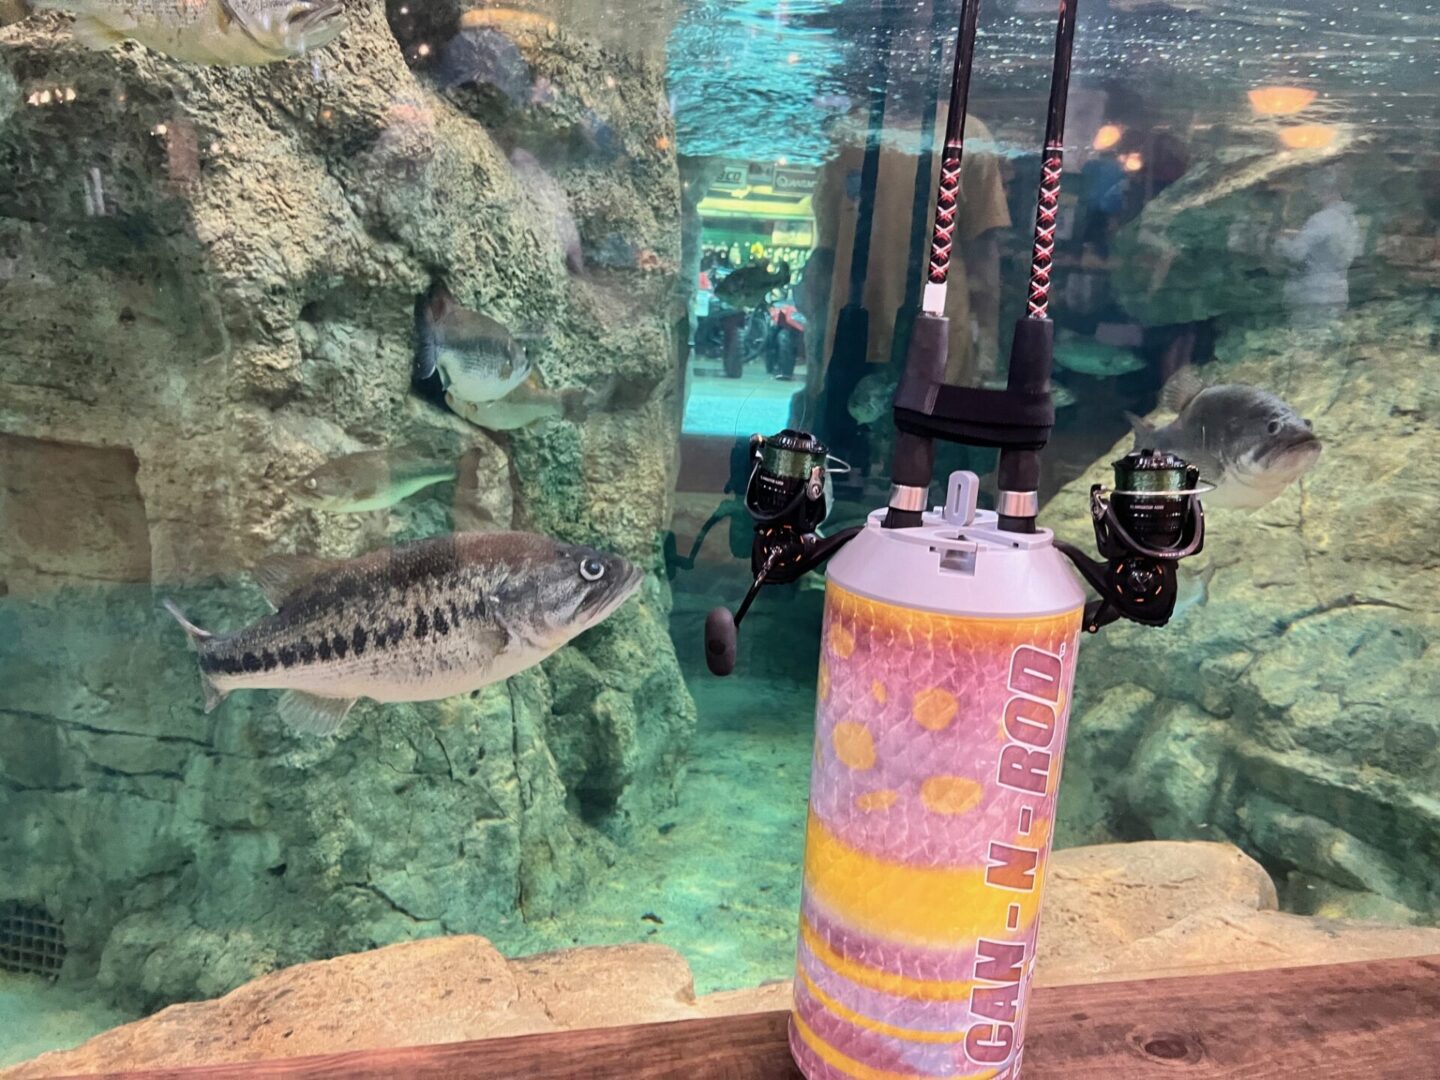 A fish swimming in an aquarium next to a bottle of water.